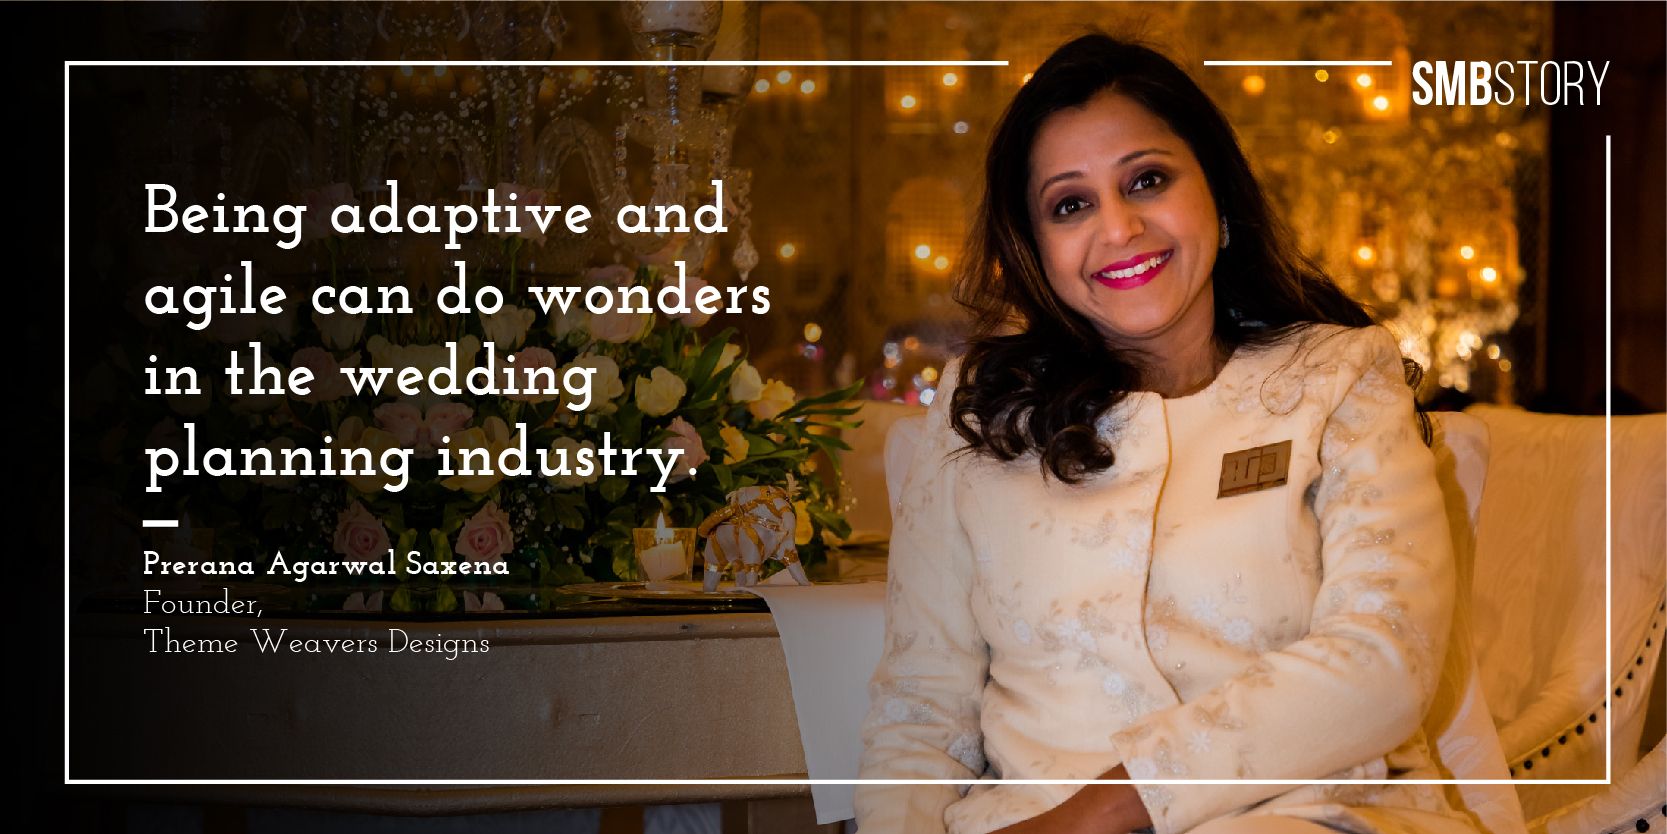 As ceremonies evolve post-COVID, this entrepreneur reveals how wedding planners can survive
